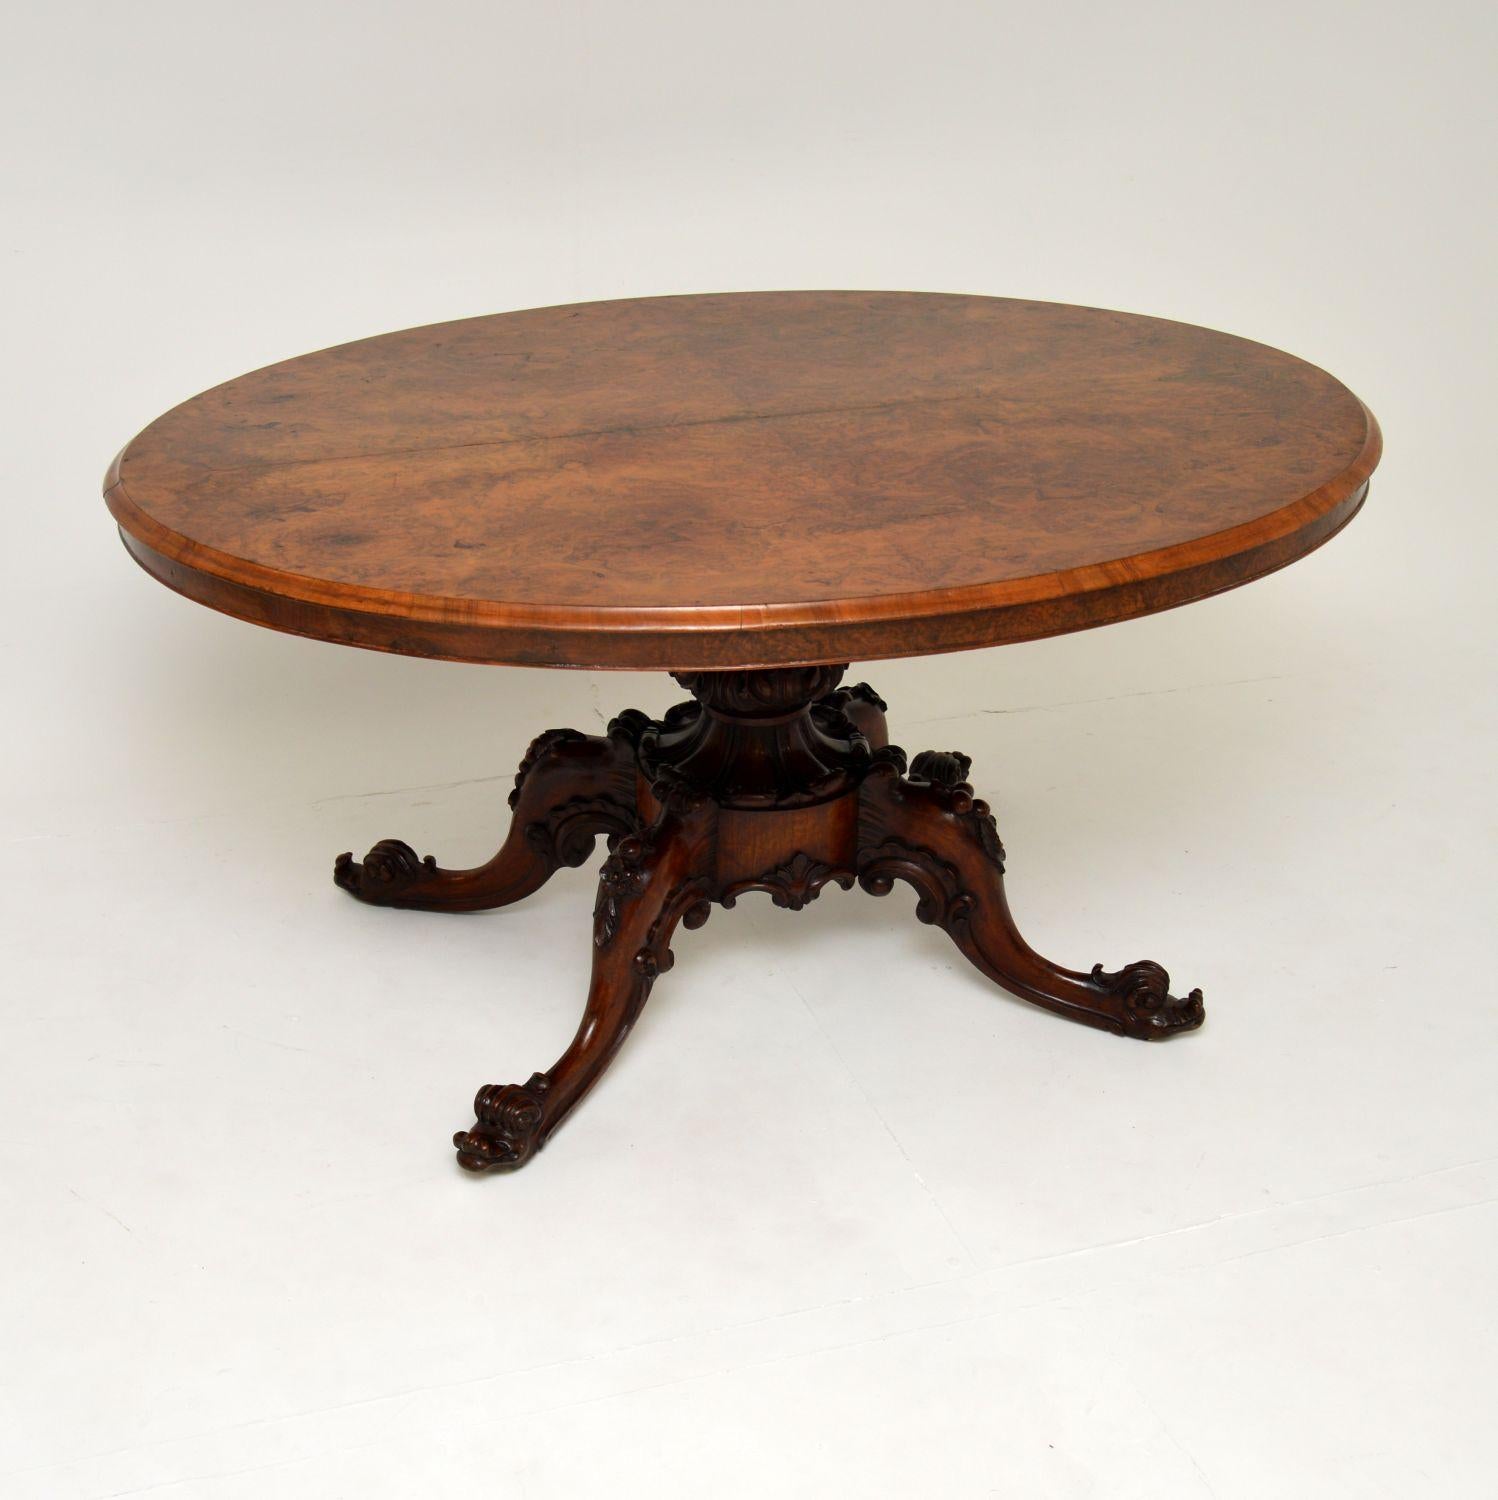 An absolutely stunning antique Victorian walnut breakfast table of the highest order. This was made in England, it dates from the 1860-1880 period.

This is one of the finest quality examples we have ever come across, the design of the base is